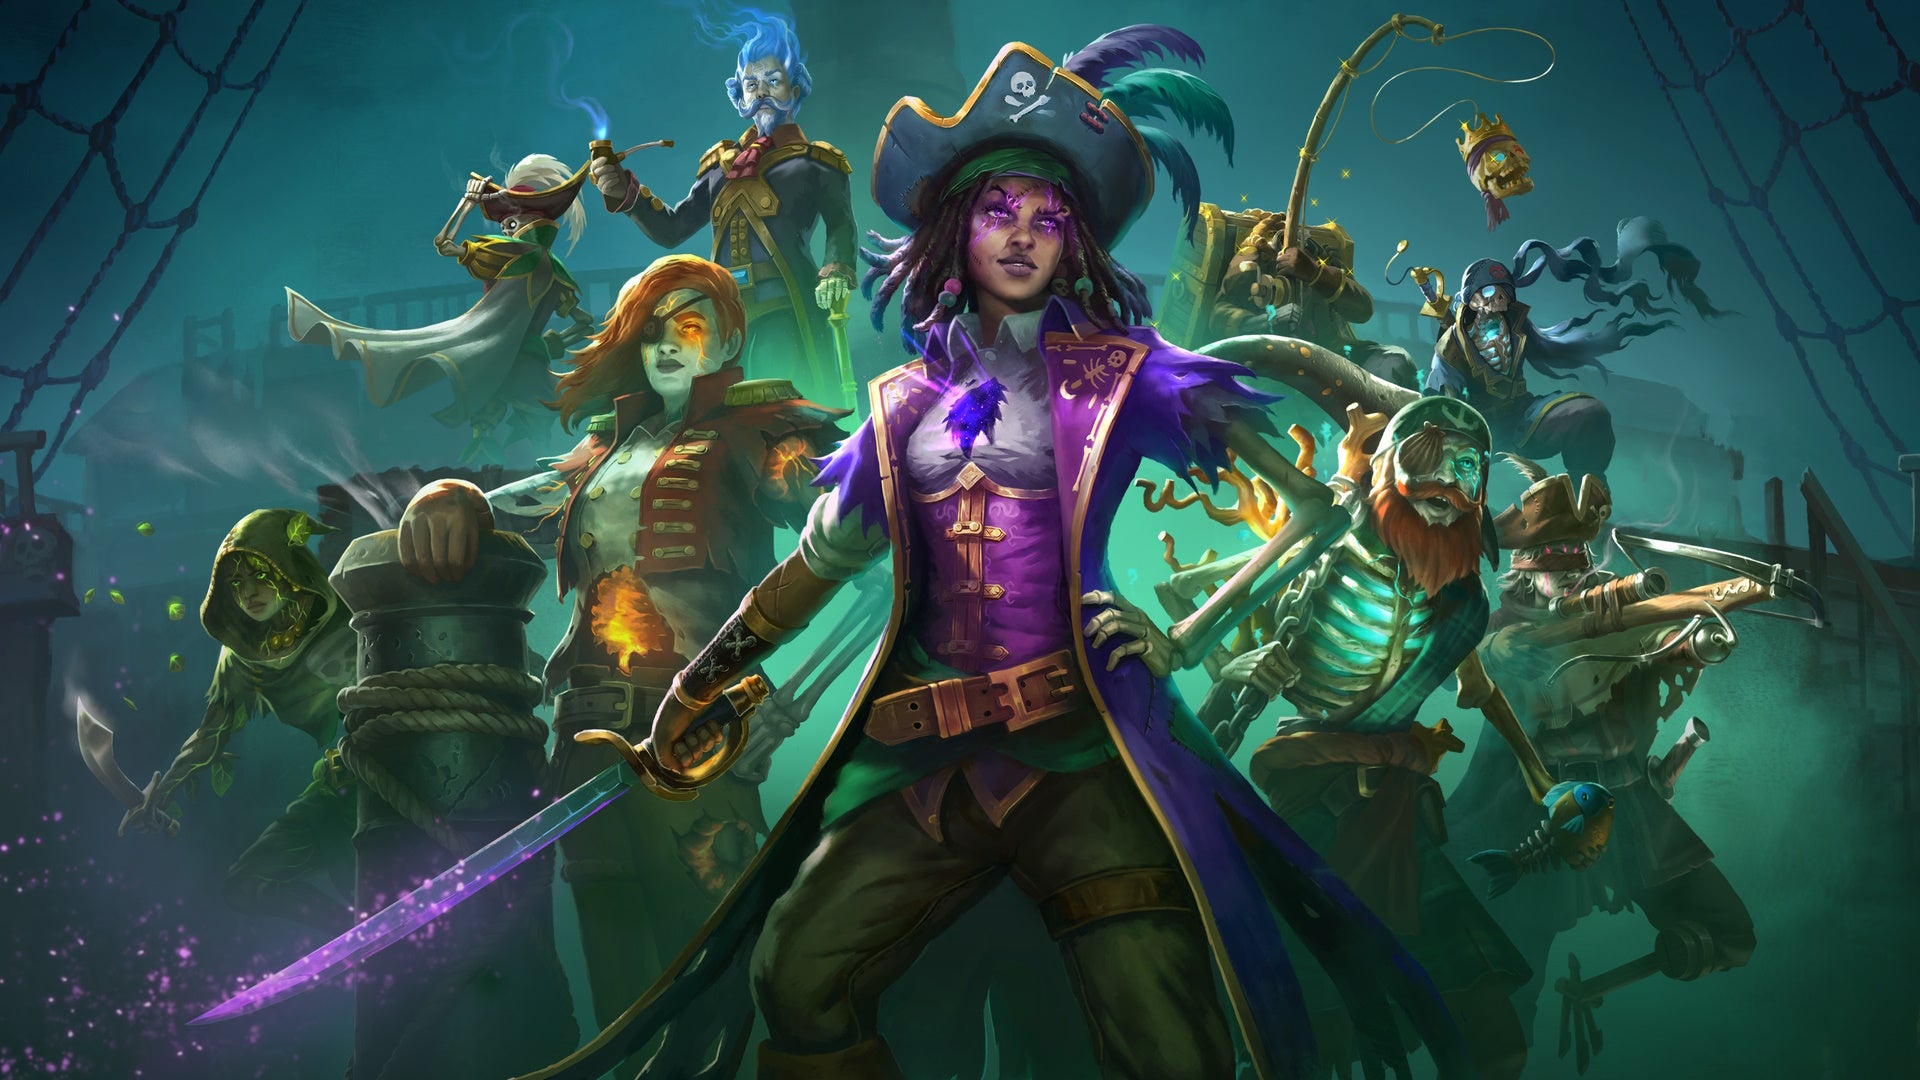 Artwork for Shadow Gambit: The Cursed Crew showing all eight of its main pirate protagonists